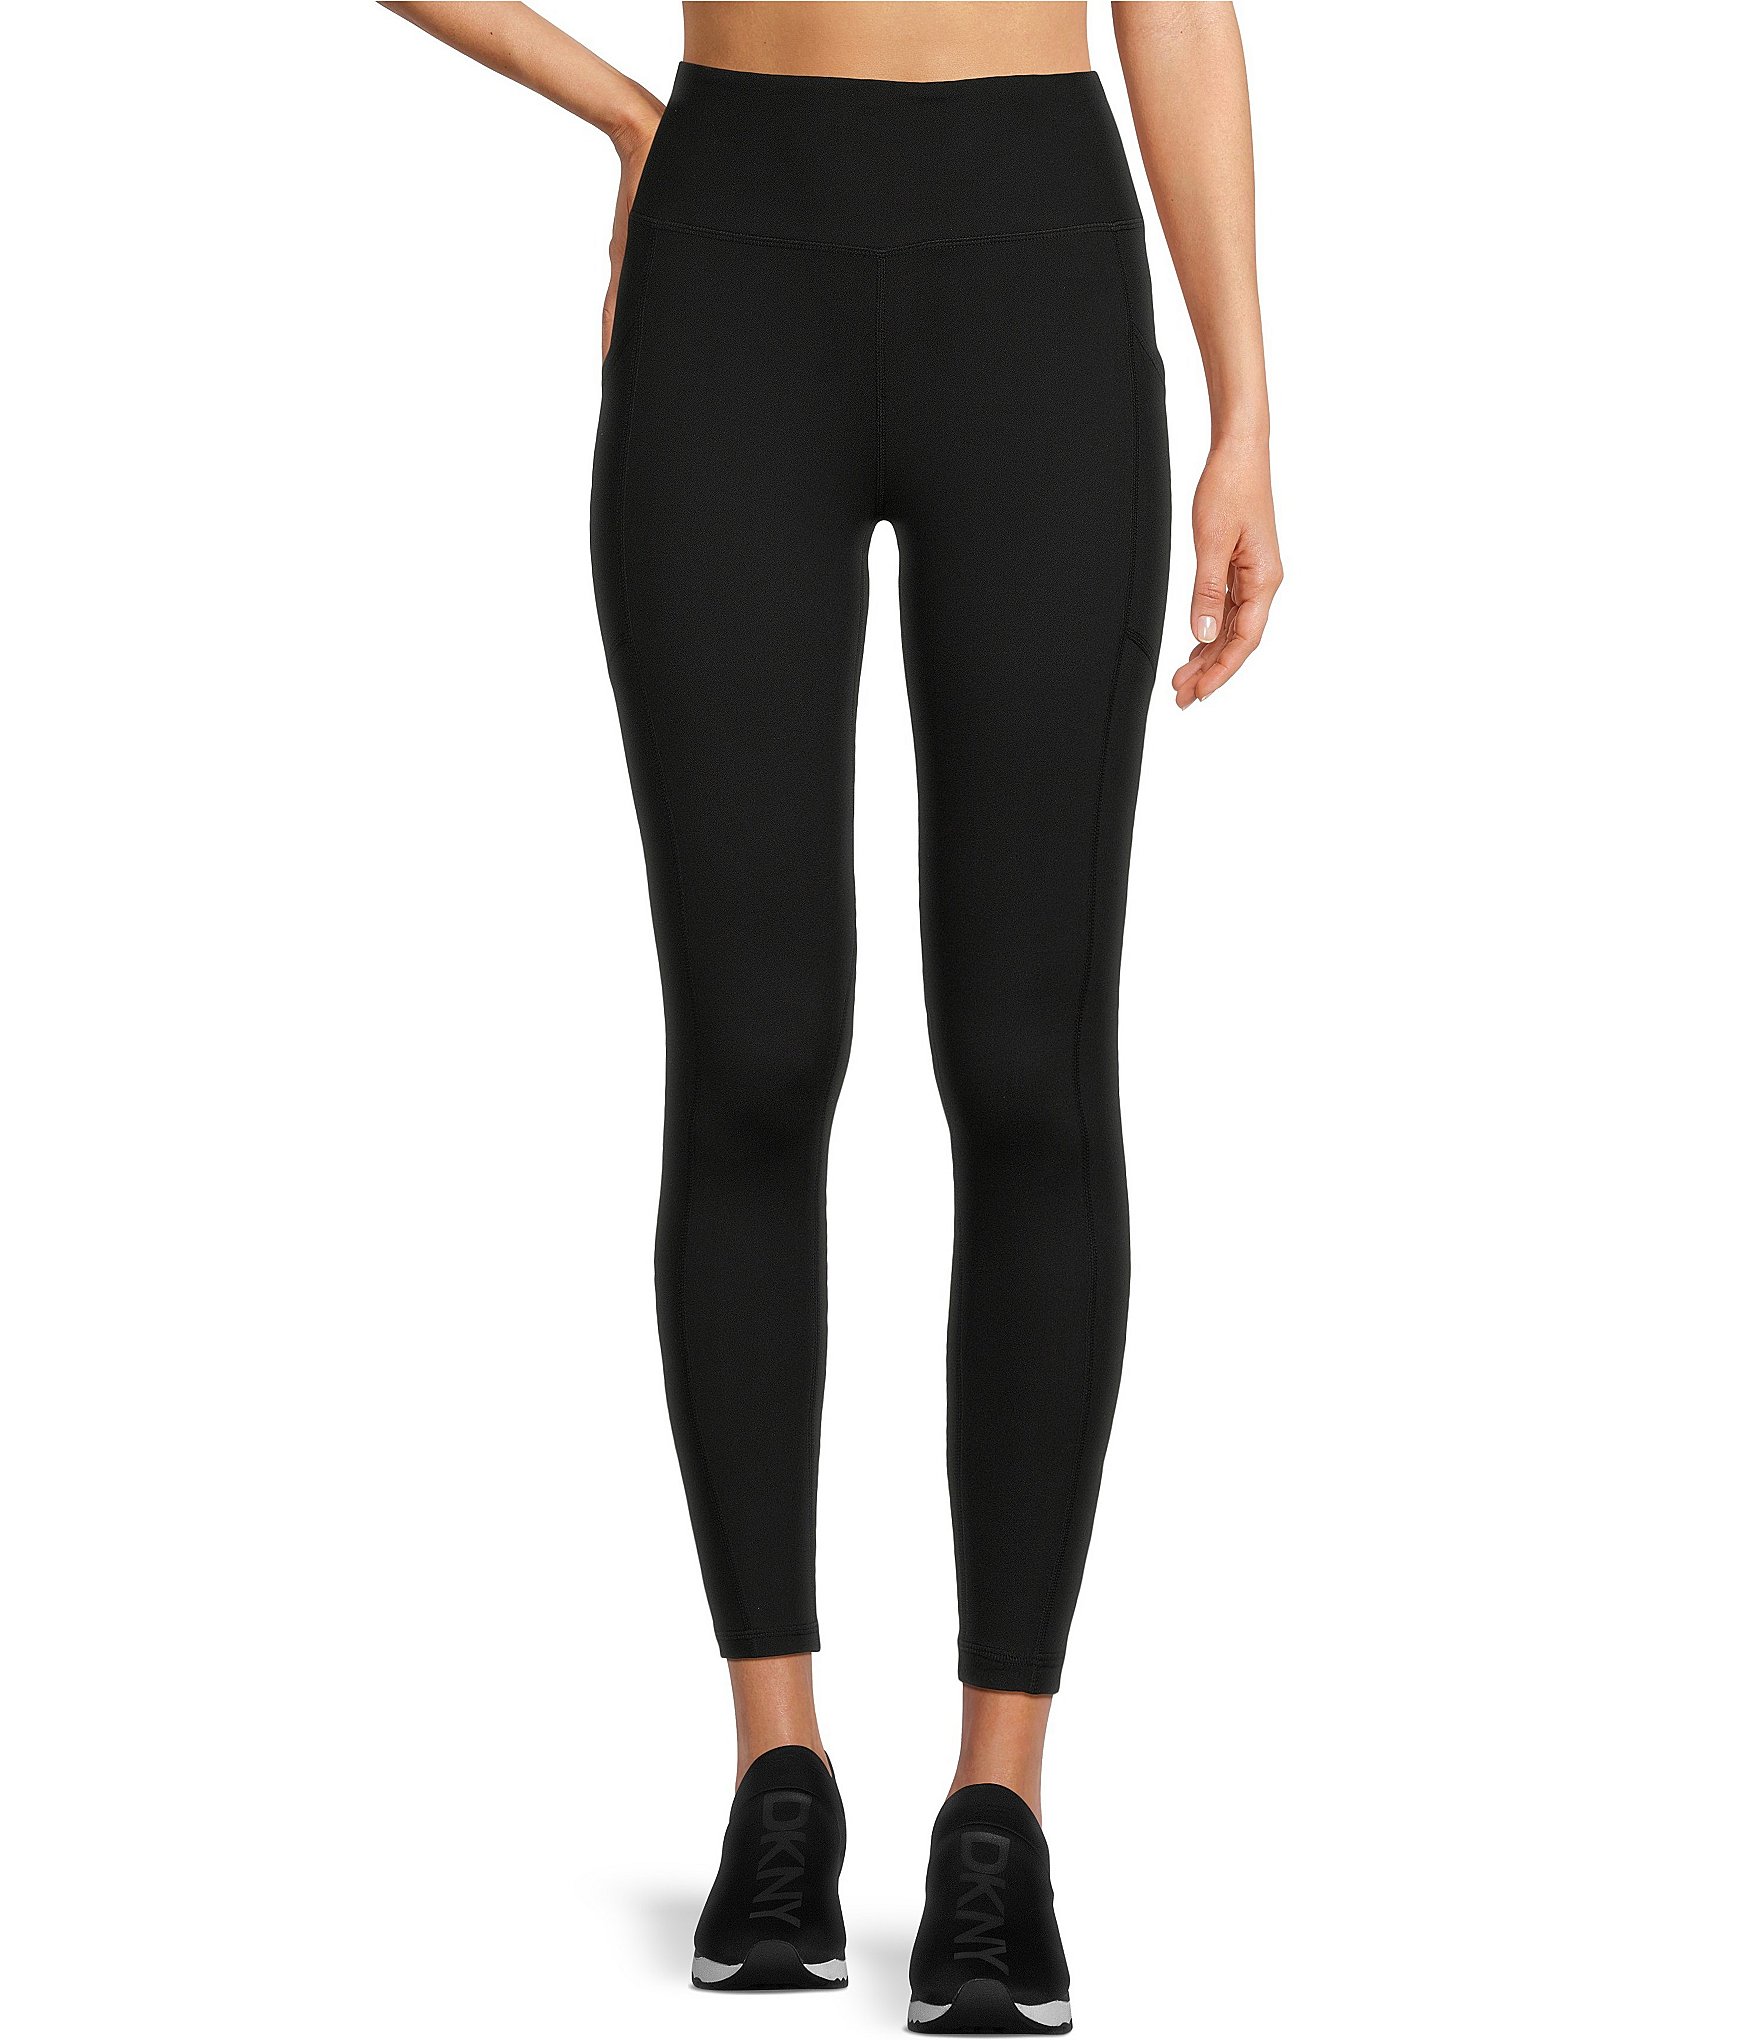 Buy the NWT Womens Elastic Waist Pull On Compression Leggings Size